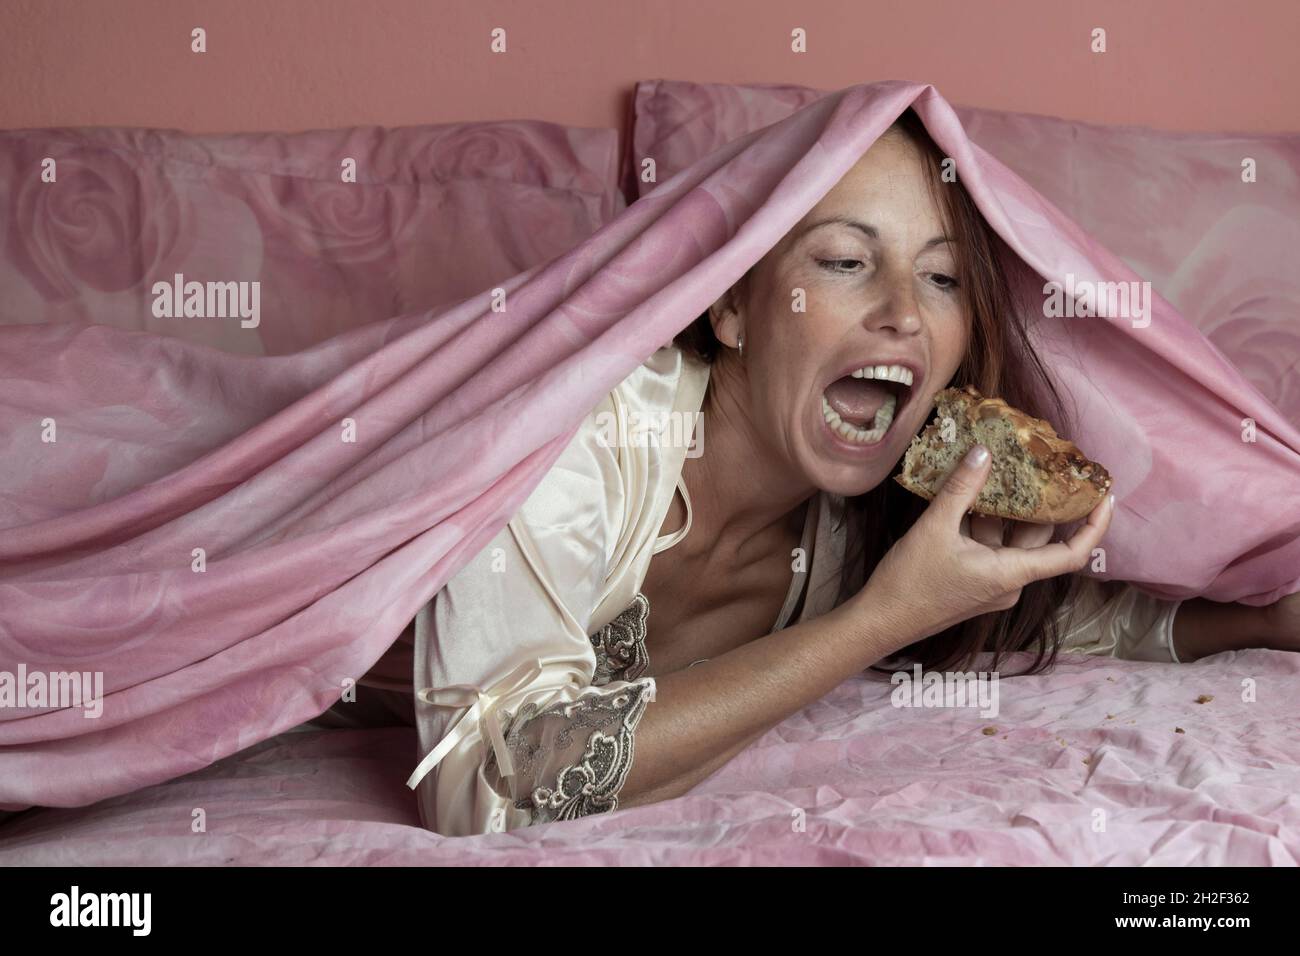 Night gluttony theme, woman on bed secretly eating a piece of pie Stock Photo